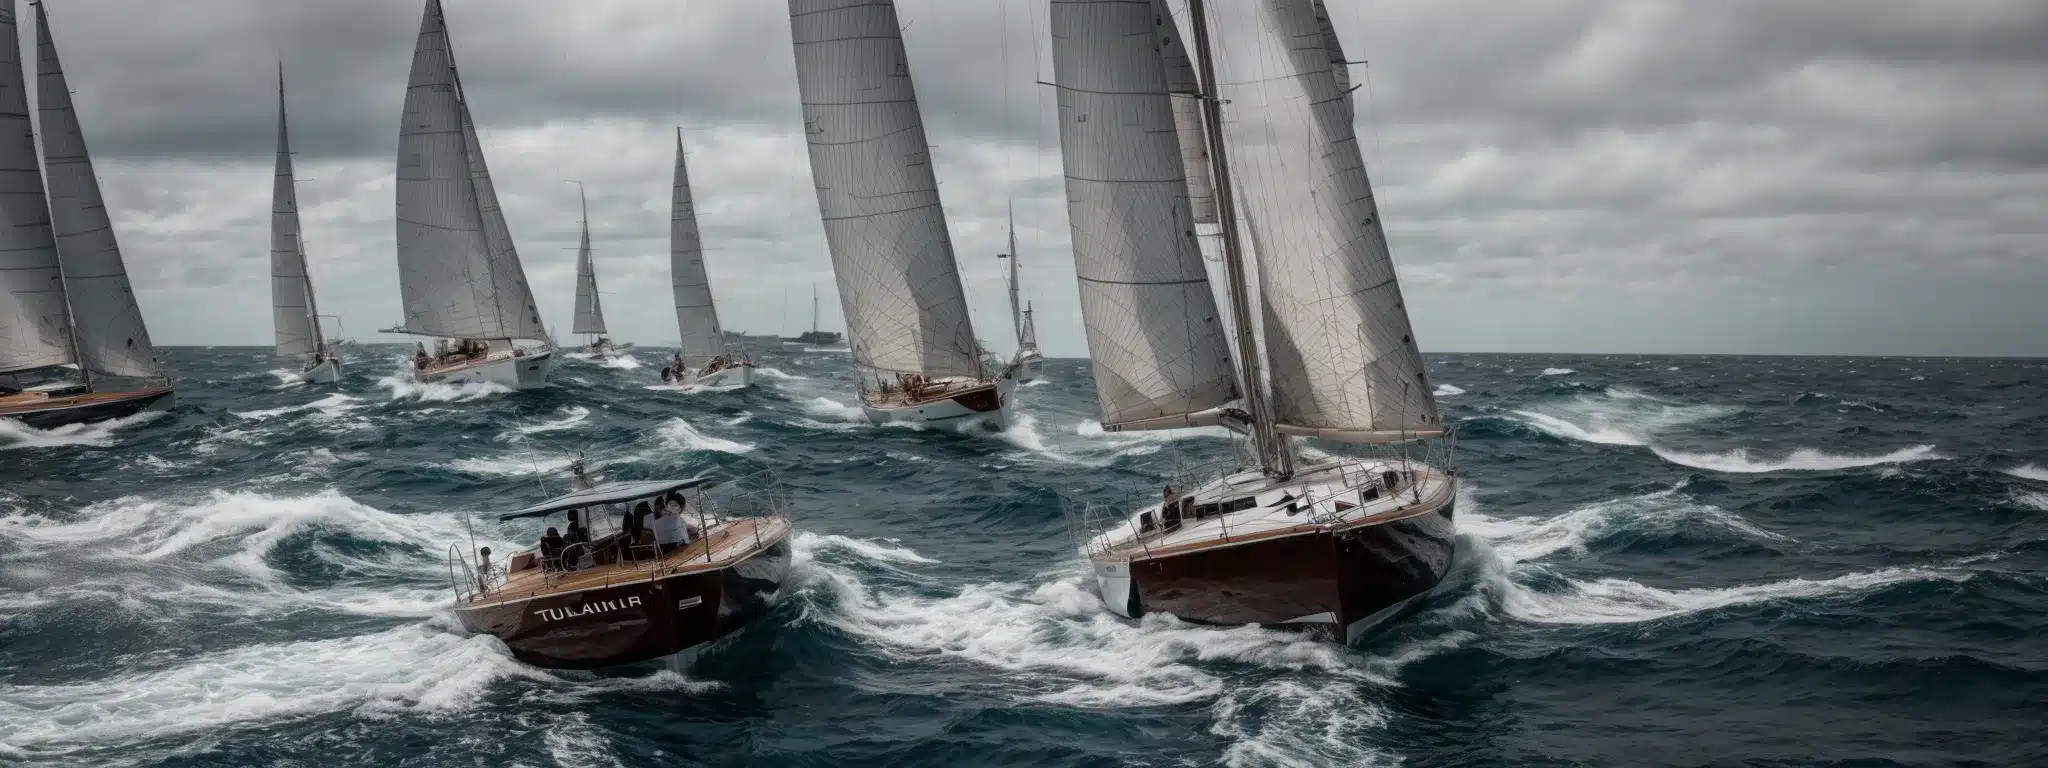 A Sailboat Navigating Tumultuous Seas Amidst Other Varied Vessels.